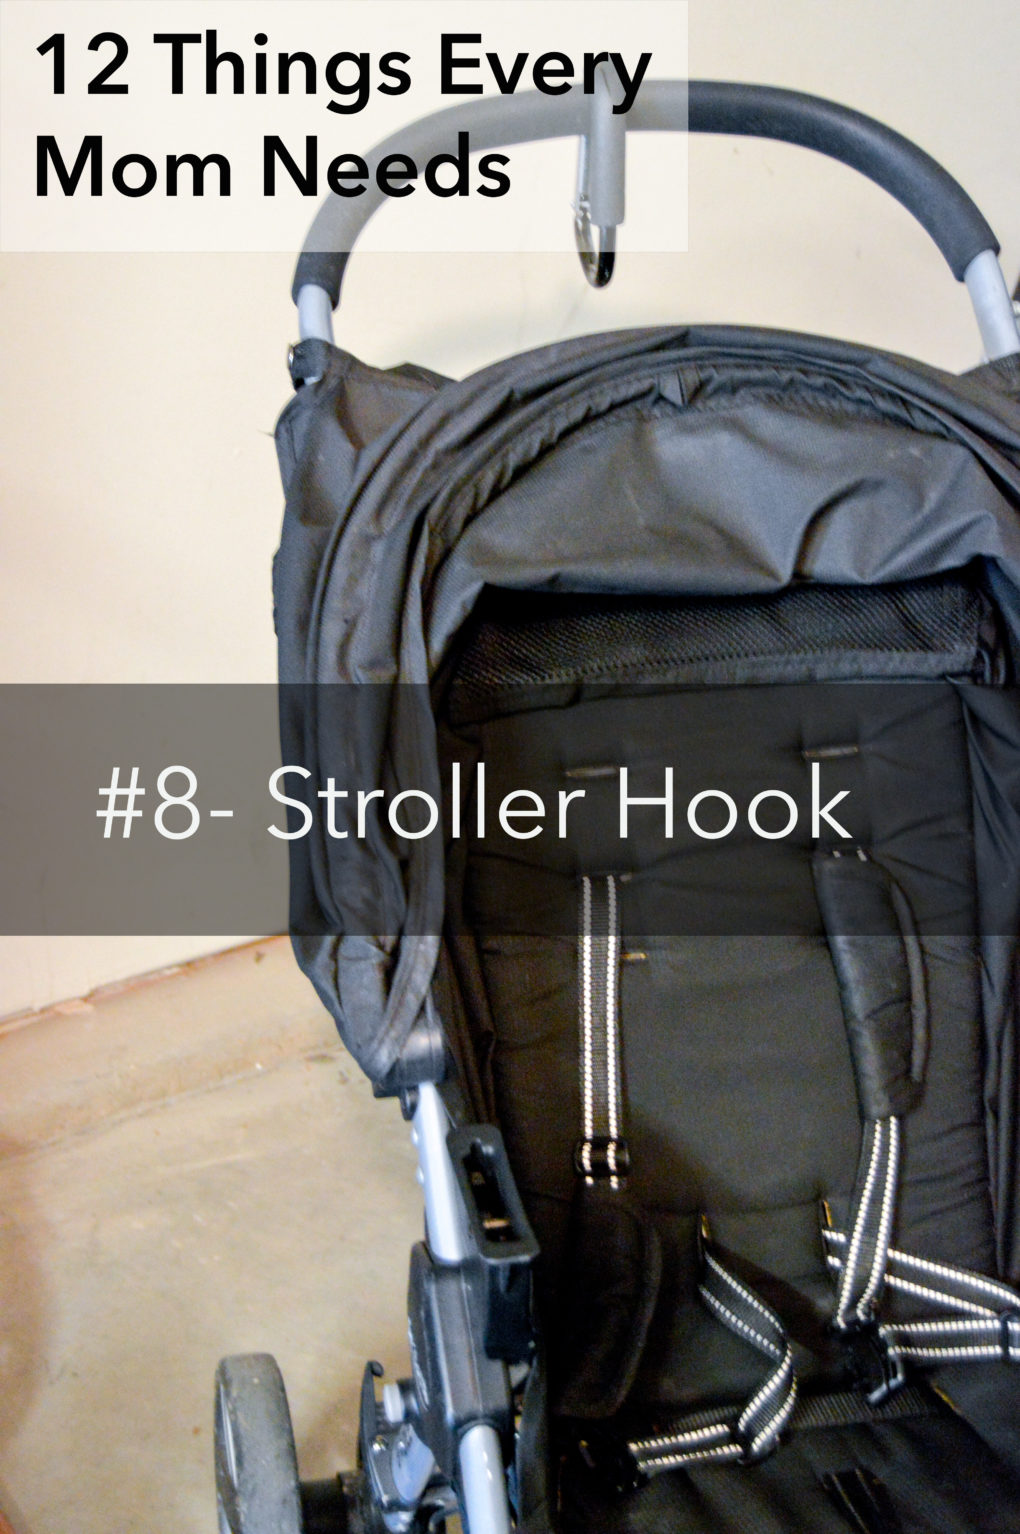 #8- stroller hook. List of 12 household things every mom needs. Gift ideas for mom. What a new mom needs.